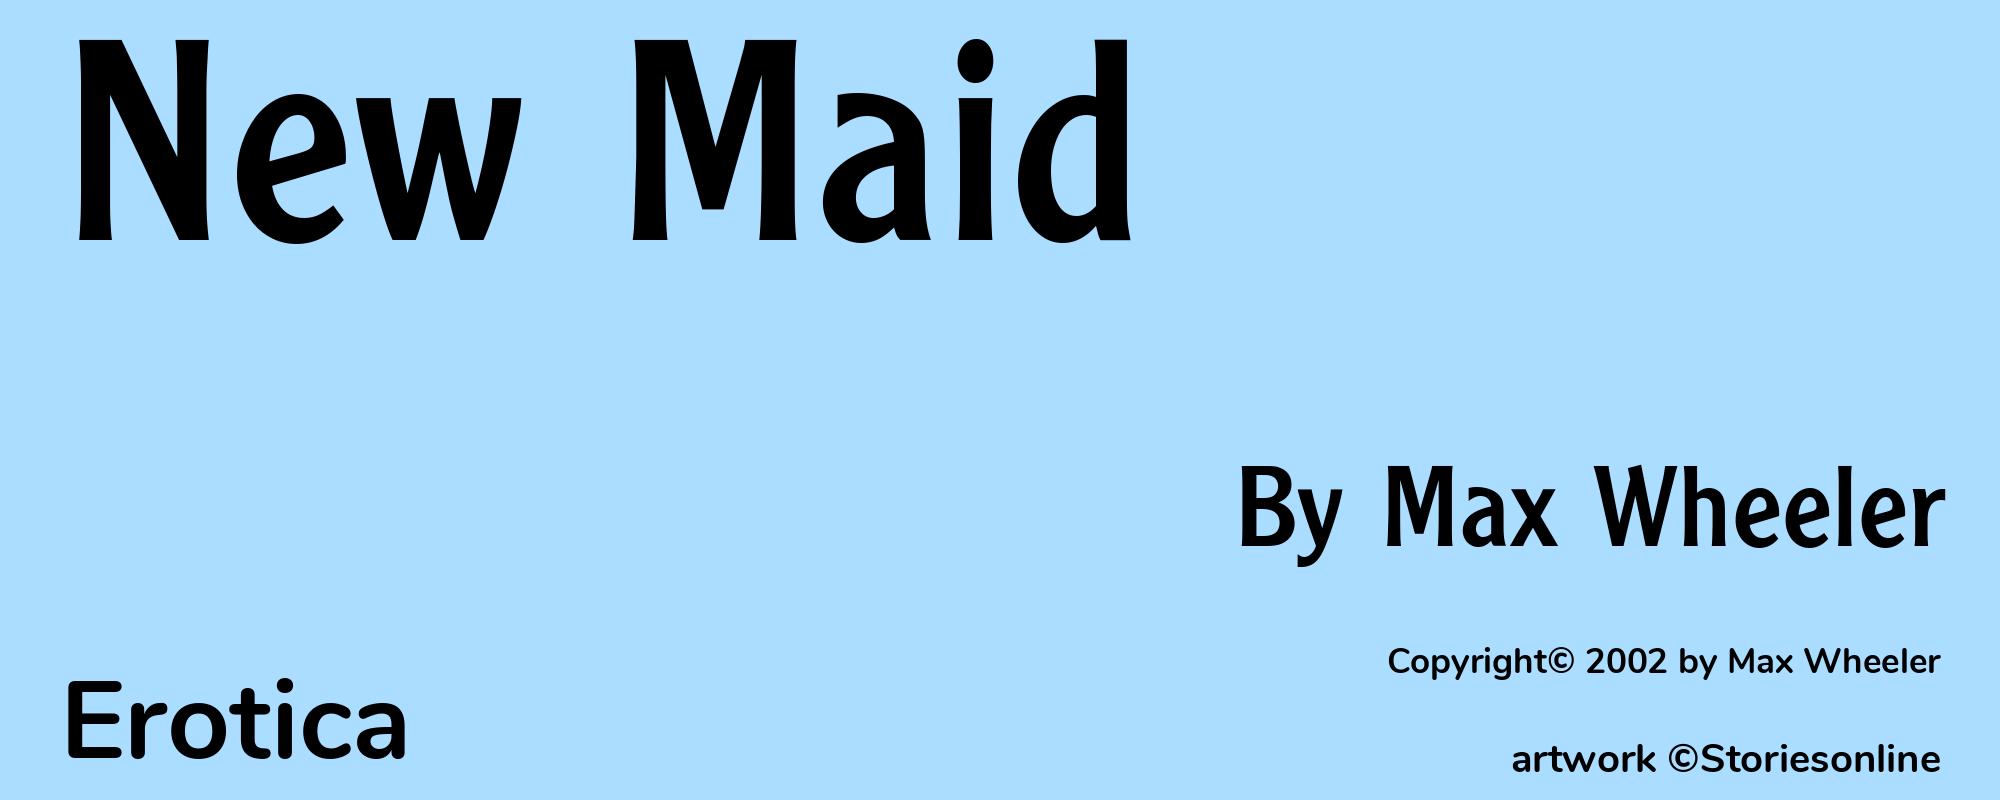 New Maid - Cover